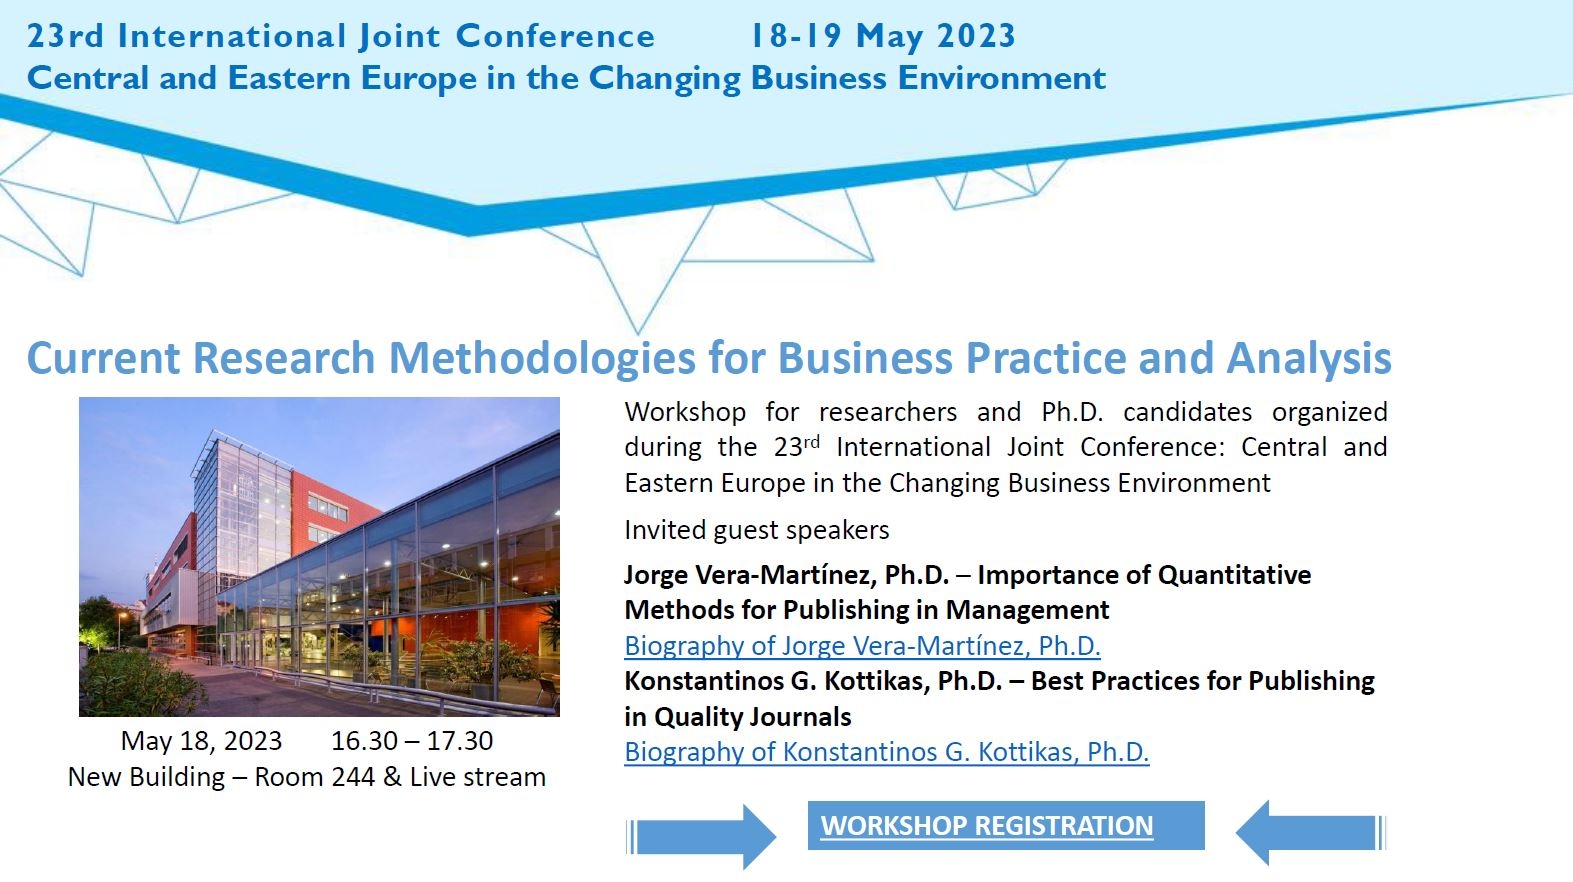 Pozvánka na workshop Current Research Methodologies for Business Practice and Analysis /18.5./